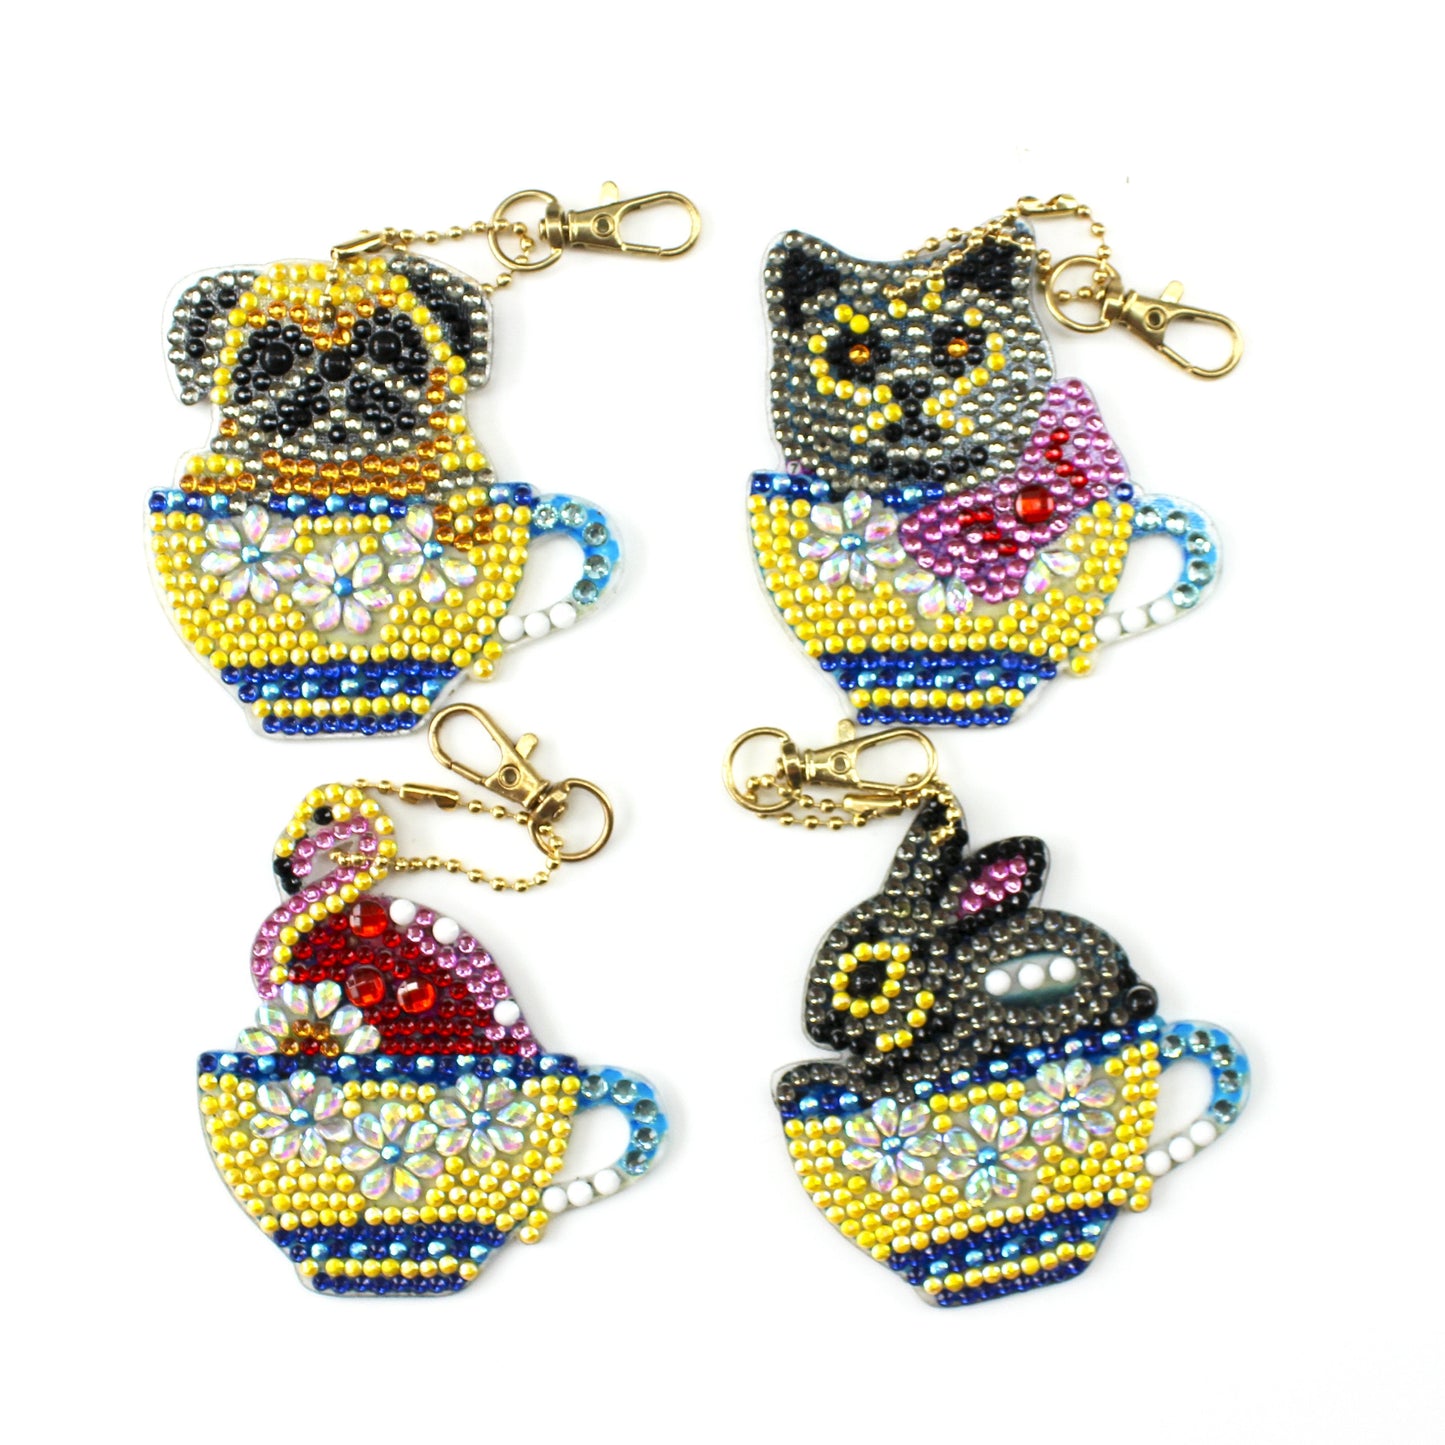 Double-sided stickers special diamond painted keychain key ring-Small animals